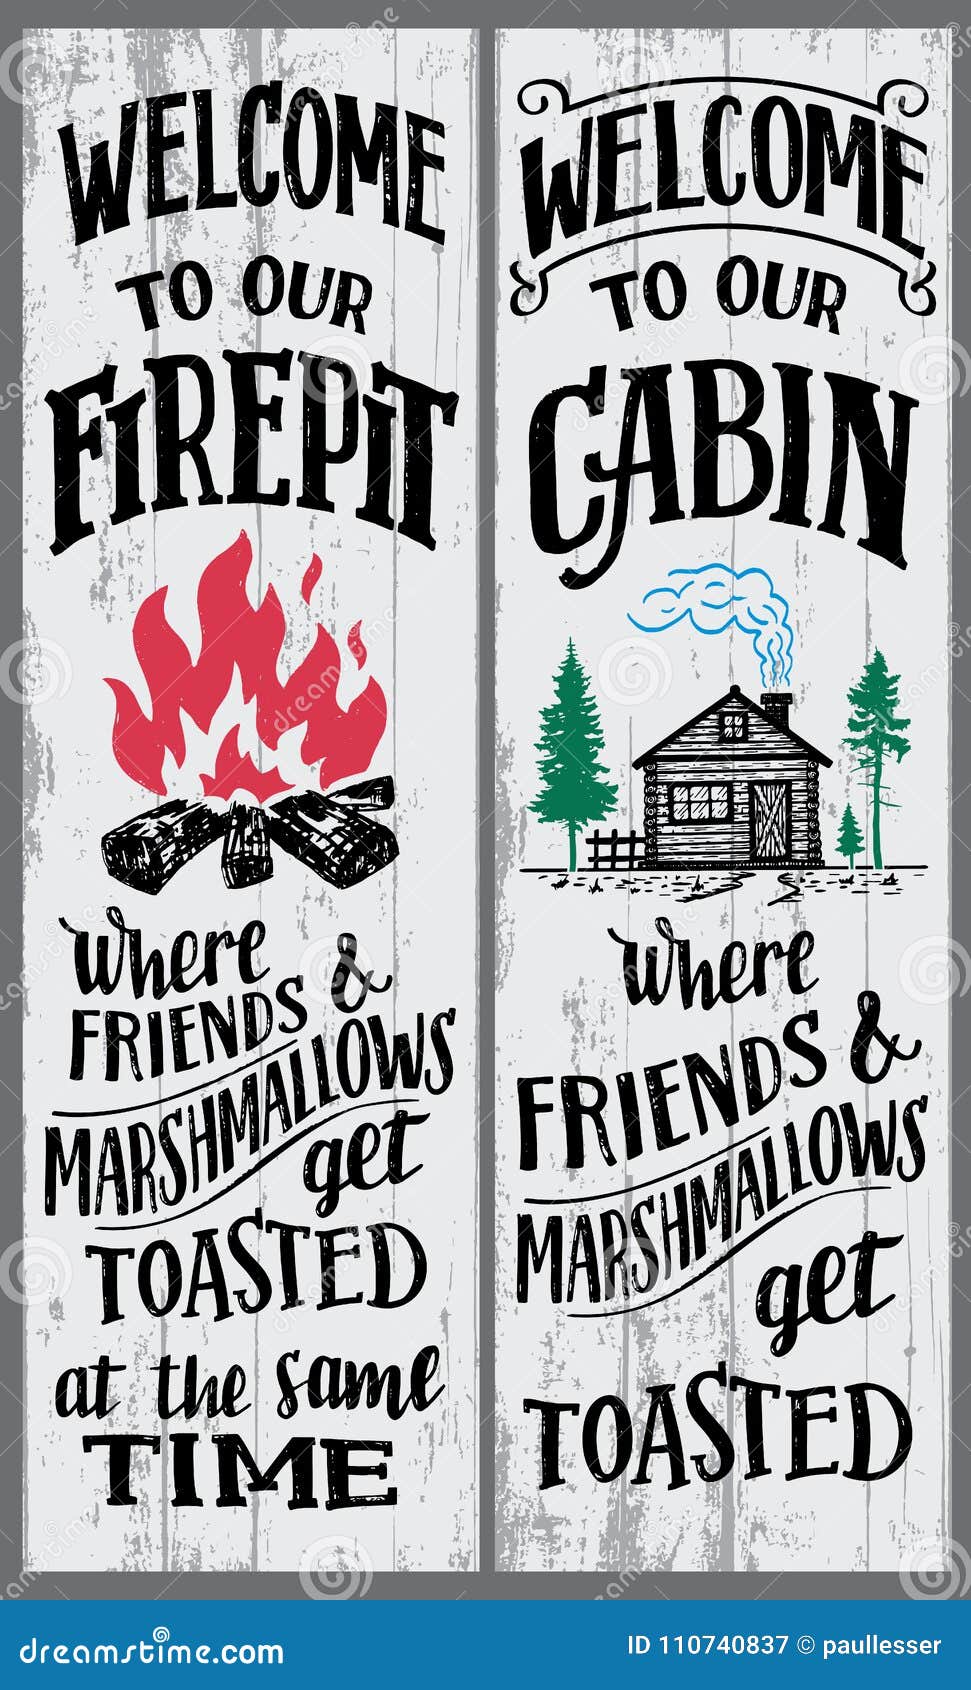 welcome to our firepit and cabin sign